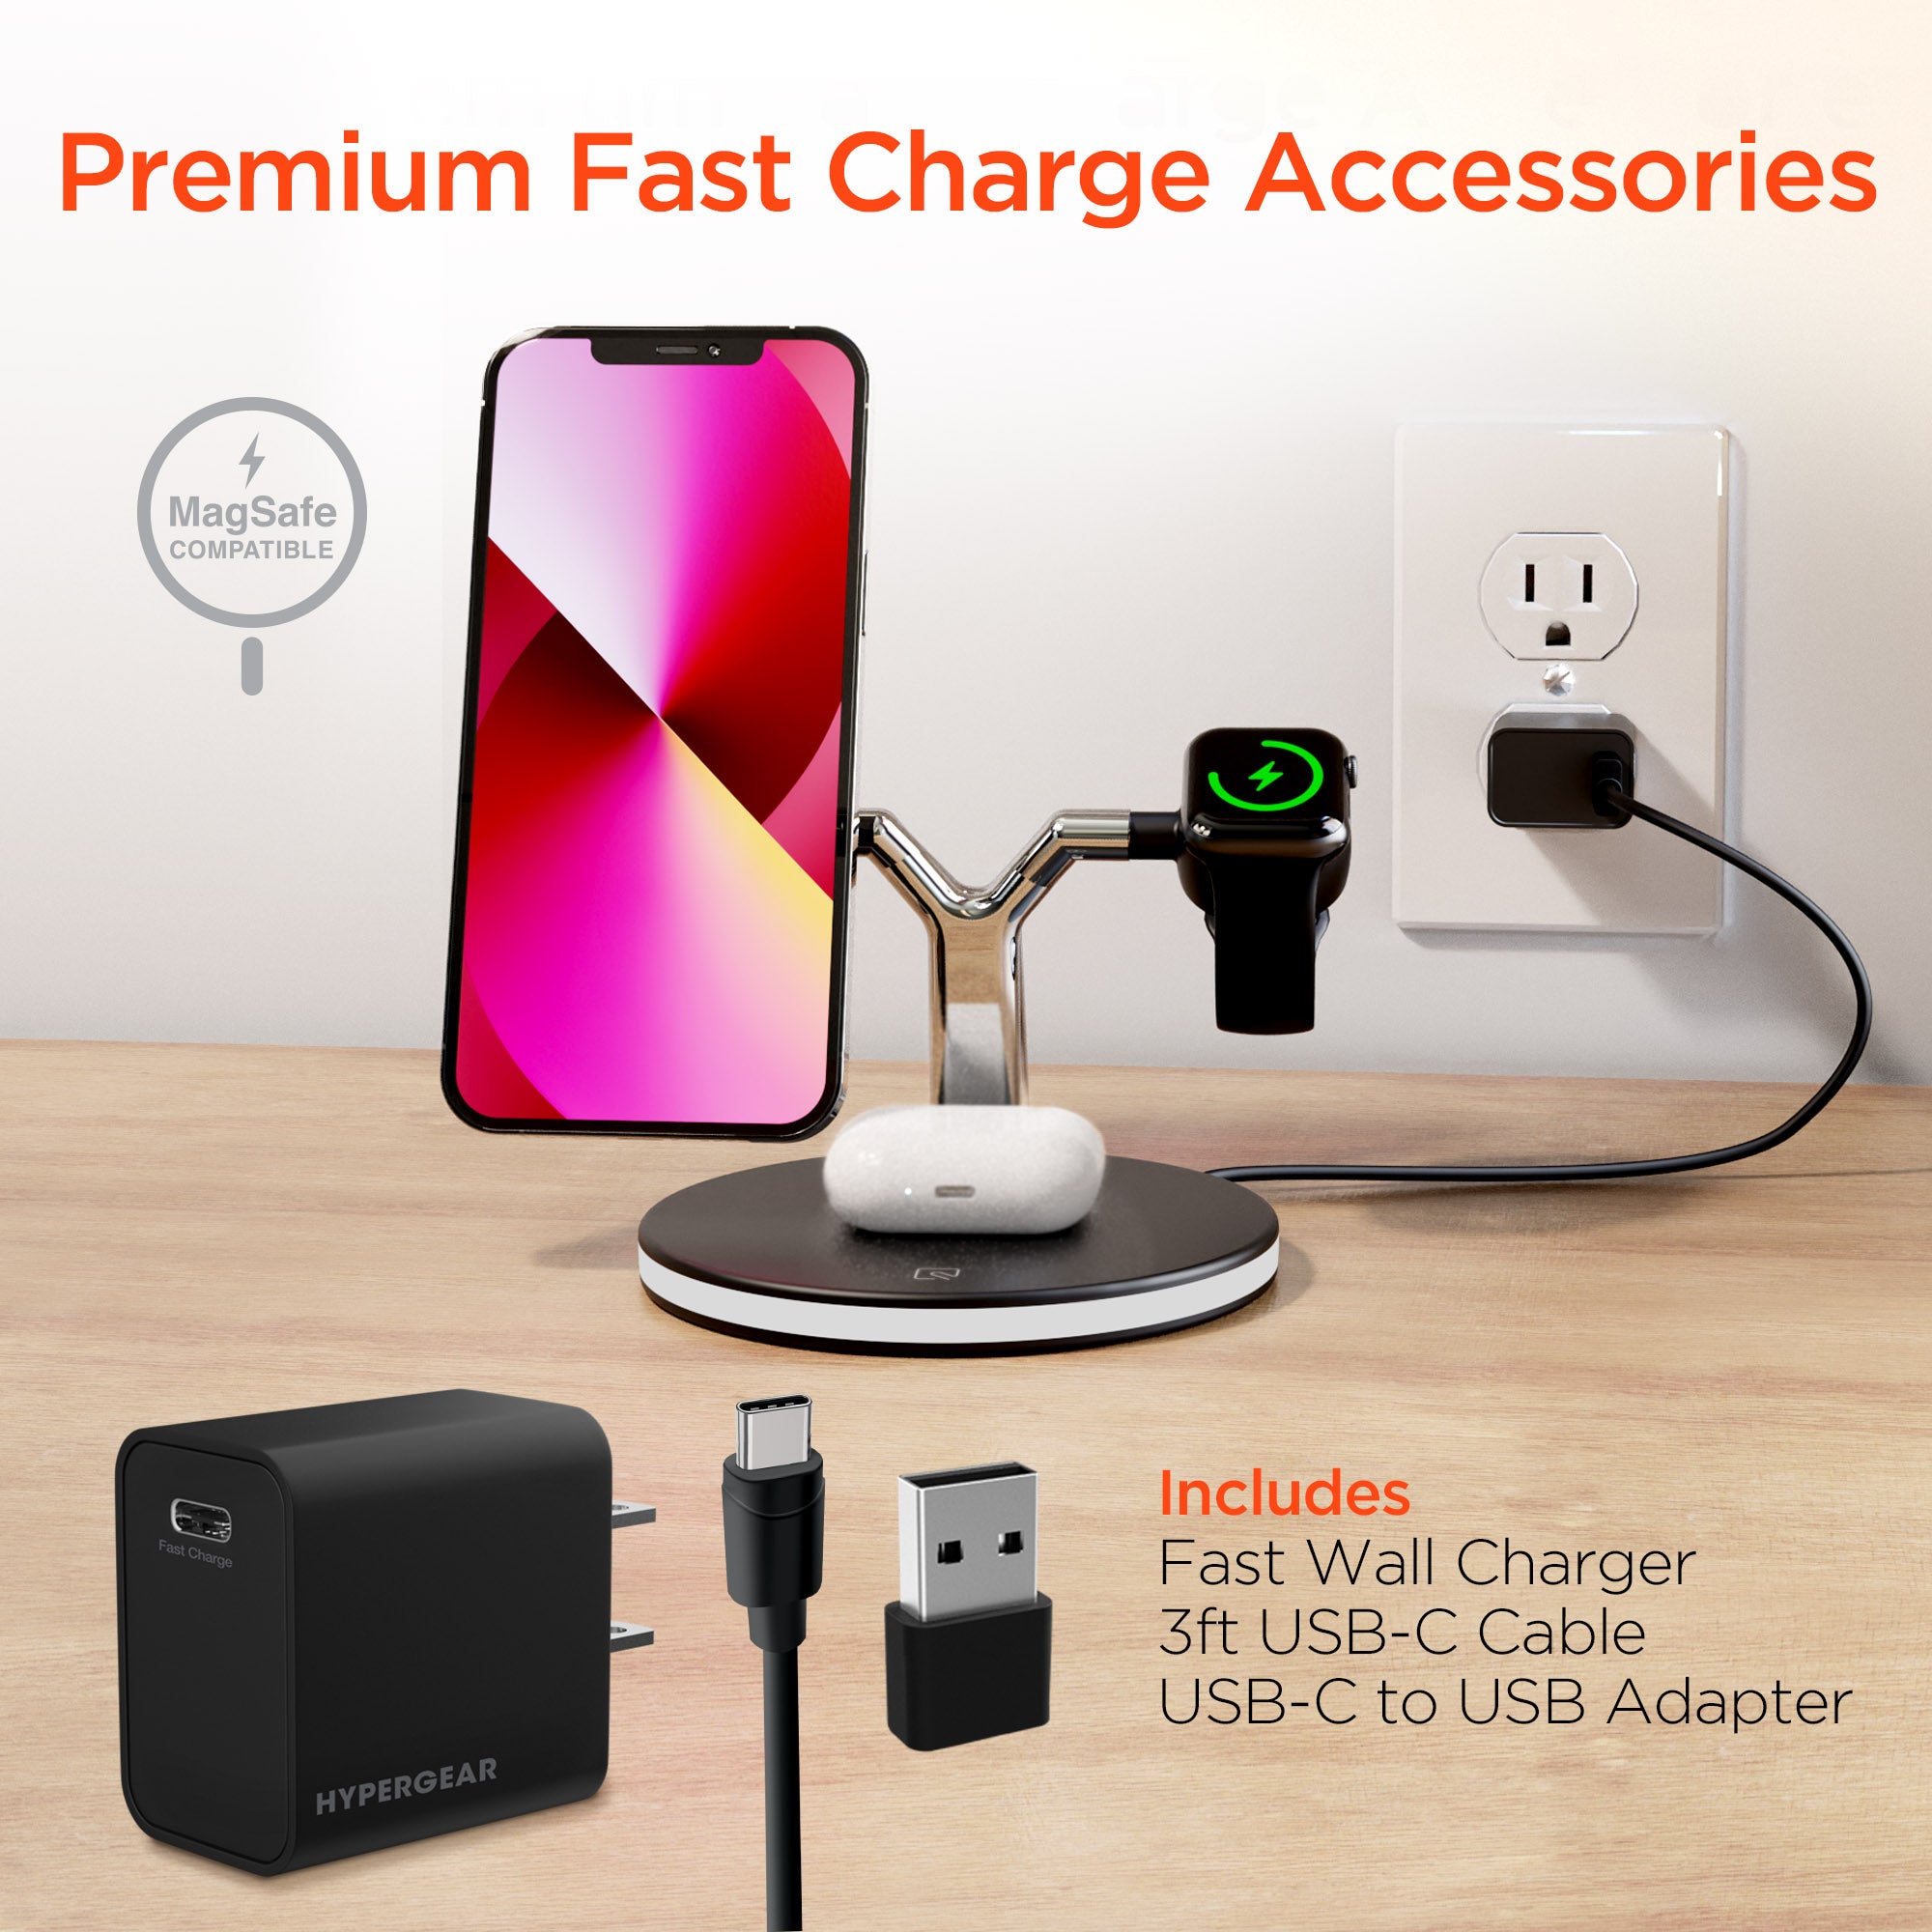 Wireless Chargers - MagSafe - All Accessories - Apple